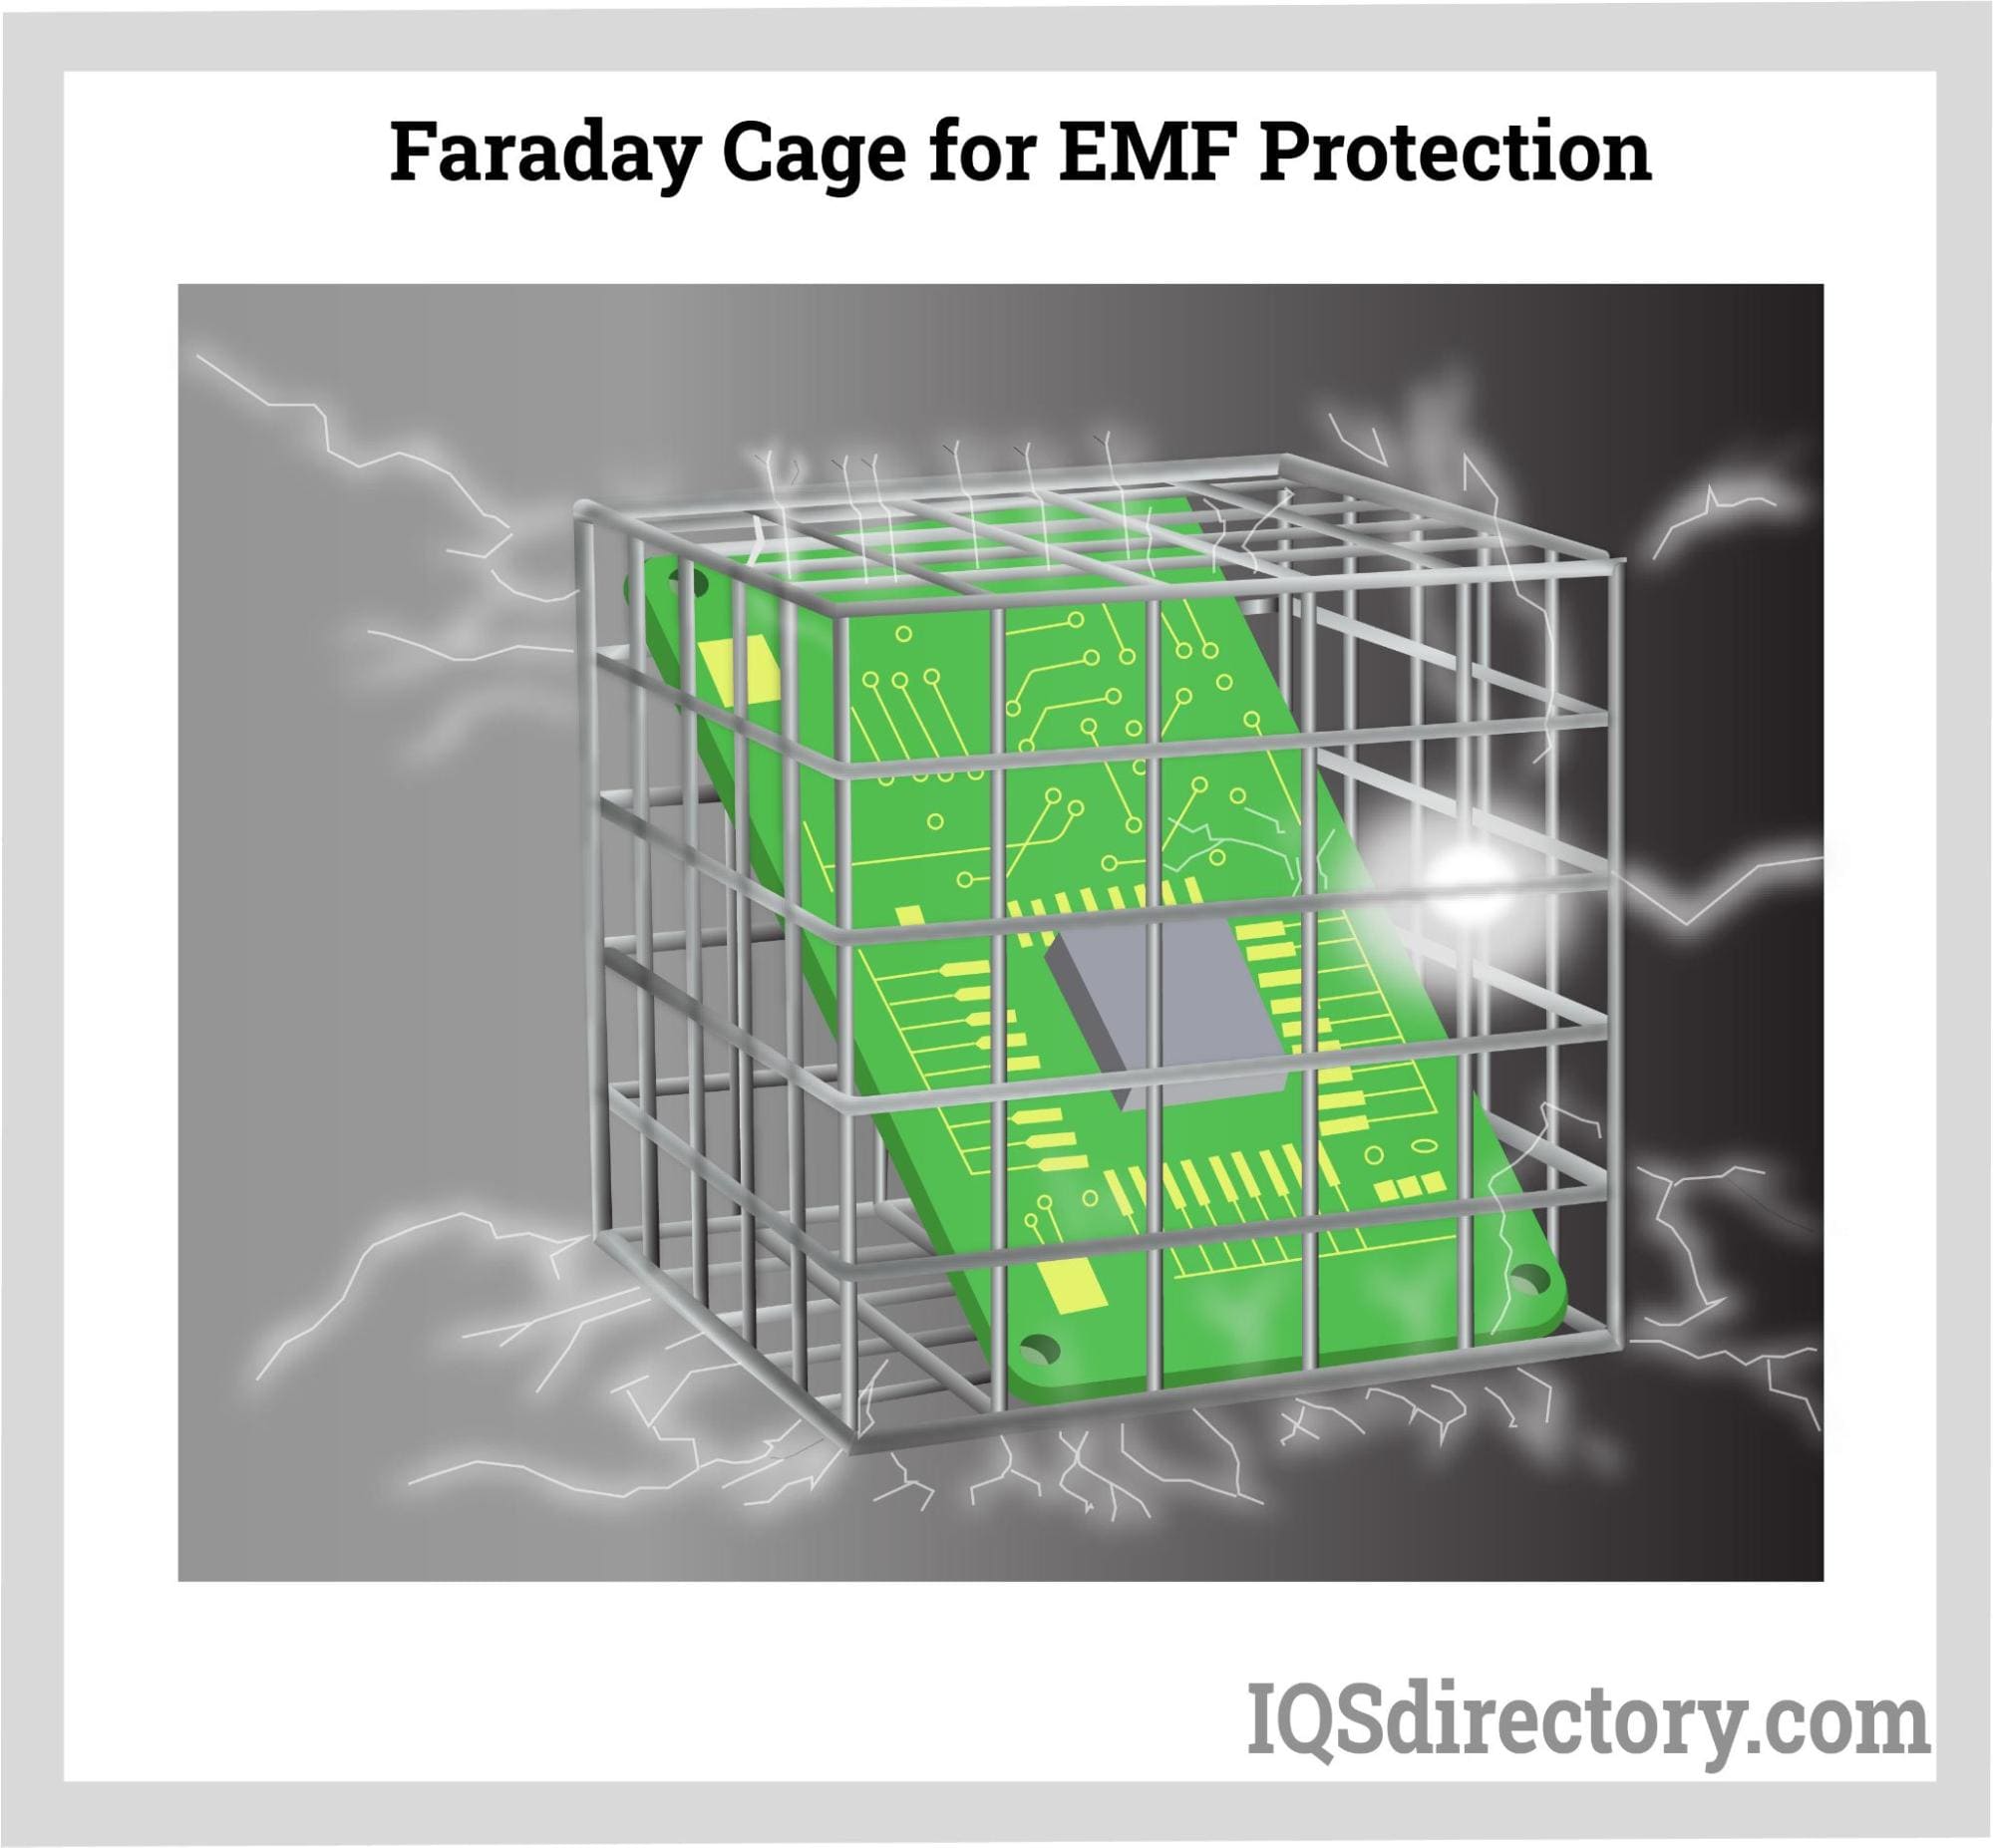 Faraday Cage for EMF Protection